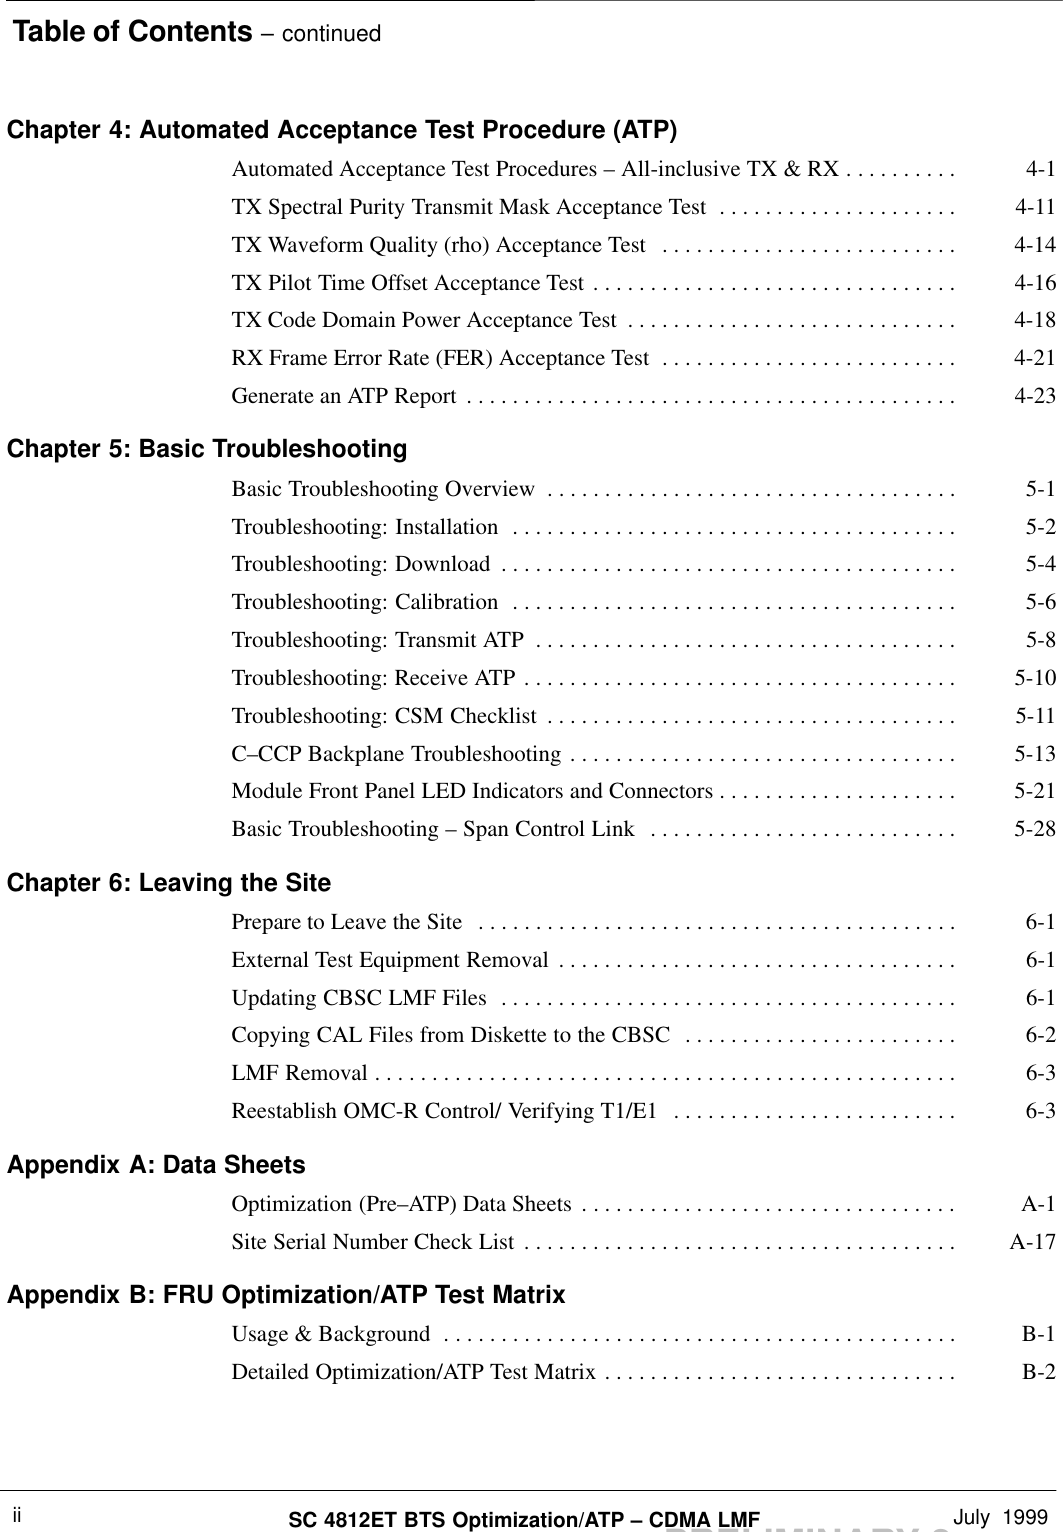 Table of Contents – continuedPRELIMINARY 2SC 4812ET BTS Optimization/ATP – CDMA LMF July  1999iiChapter 4: Automated Acceptance Test Procedure (ATP)Automated Acceptance Test Procedures – All-inclusive TX &amp; RX 4-1. . . . . . . . . . TX Spectral Purity Transmit Mask Acceptance Test 4-11. . . . . . . . . . . . . . . . . . . . . TX Waveform Quality (rho) Acceptance Test 4-14. . . . . . . . . . . . . . . . . . . . . . . . . . TX Pilot Time Offset Acceptance Test 4-16. . . . . . . . . . . . . . . . . . . . . . . . . . . . . . . . TX Code Domain Power Acceptance Test 4-18. . . . . . . . . . . . . . . . . . . . . . . . . . . . . RX Frame Error Rate (FER) Acceptance Test 4-21. . . . . . . . . . . . . . . . . . . . . . . . . . Generate an ATP Report 4-23. . . . . . . . . . . . . . . . . . . . . . . . . . . . . . . . . . . . . . . . . . . Chapter 5: Basic TroubleshootingBasic Troubleshooting Overview 5-1. . . . . . . . . . . . . . . . . . . . . . . . . . . . . . . . . . . . Troubleshooting: Installation 5-2. . . . . . . . . . . . . . . . . . . . . . . . . . . . . . . . . . . . . . . Troubleshooting: Download 5-4. . . . . . . . . . . . . . . . . . . . . . . . . . . . . . . . . . . . . . . . Troubleshooting: Calibration 5-6. . . . . . . . . . . . . . . . . . . . . . . . . . . . . . . . . . . . . . . Troubleshooting: Transmit ATP 5-8. . . . . . . . . . . . . . . . . . . . . . . . . . . . . . . . . . . . . Troubleshooting: Receive ATP 5-10. . . . . . . . . . . . . . . . . . . . . . . . . . . . . . . . . . . . . . Troubleshooting: CSM Checklist 5-11. . . . . . . . . . . . . . . . . . . . . . . . . . . . . . . . . . . . C–CCP Backplane Troubleshooting 5-13. . . . . . . . . . . . . . . . . . . . . . . . . . . . . . . . . . Module Front Panel LED Indicators and Connectors 5-21. . . . . . . . . . . . . . . . . . . . . Basic Troubleshooting – Span Control Link 5-28. . . . . . . . . . . . . . . . . . . . . . . . . . . Chapter 6: Leaving the SitePrepare to Leave the Site 6-1. . . . . . . . . . . . . . . . . . . . . . . . . . . . . . . . . . . . . . . . . . External Test Equipment Removal 6-1. . . . . . . . . . . . . . . . . . . . . . . . . . . . . . . . . . . Updating CBSC LMF Files 6-1. . . . . . . . . . . . . . . . . . . . . . . . . . . . . . . . . . . . . . . . Copying CAL Files from Diskette to the CBSC 6-2. . . . . . . . . . . . . . . . . . . . . . . . LMF Removal 6-3. . . . . . . . . . . . . . . . . . . . . . . . . . . . . . . . . . . . . . . . . . . . . . . . . . . Reestablish OMC-R Control/ Verifying T1/E1 6-3. . . . . . . . . . . . . . . . . . . . . . . . . Appendix A: Data SheetsOptimization (Pre–ATP) Data Sheets A-1. . . . . . . . . . . . . . . . . . . . . . . . . . . . . . . . . Site Serial Number Check List A-17. . . . . . . . . . . . . . . . . . . . . . . . . . . . . . . . . . . . . . Appendix B: FRU Optimization/ATP Test MatrixUsage &amp; Background B-1. . . . . . . . . . . . . . . . . . . . . . . . . . . . . . . . . . . . . . . . . . . . . Detailed Optimization/ATP Test Matrix B-2. . . . . . . . . . . . . . . . . . . . . . . . . . . . . . . 